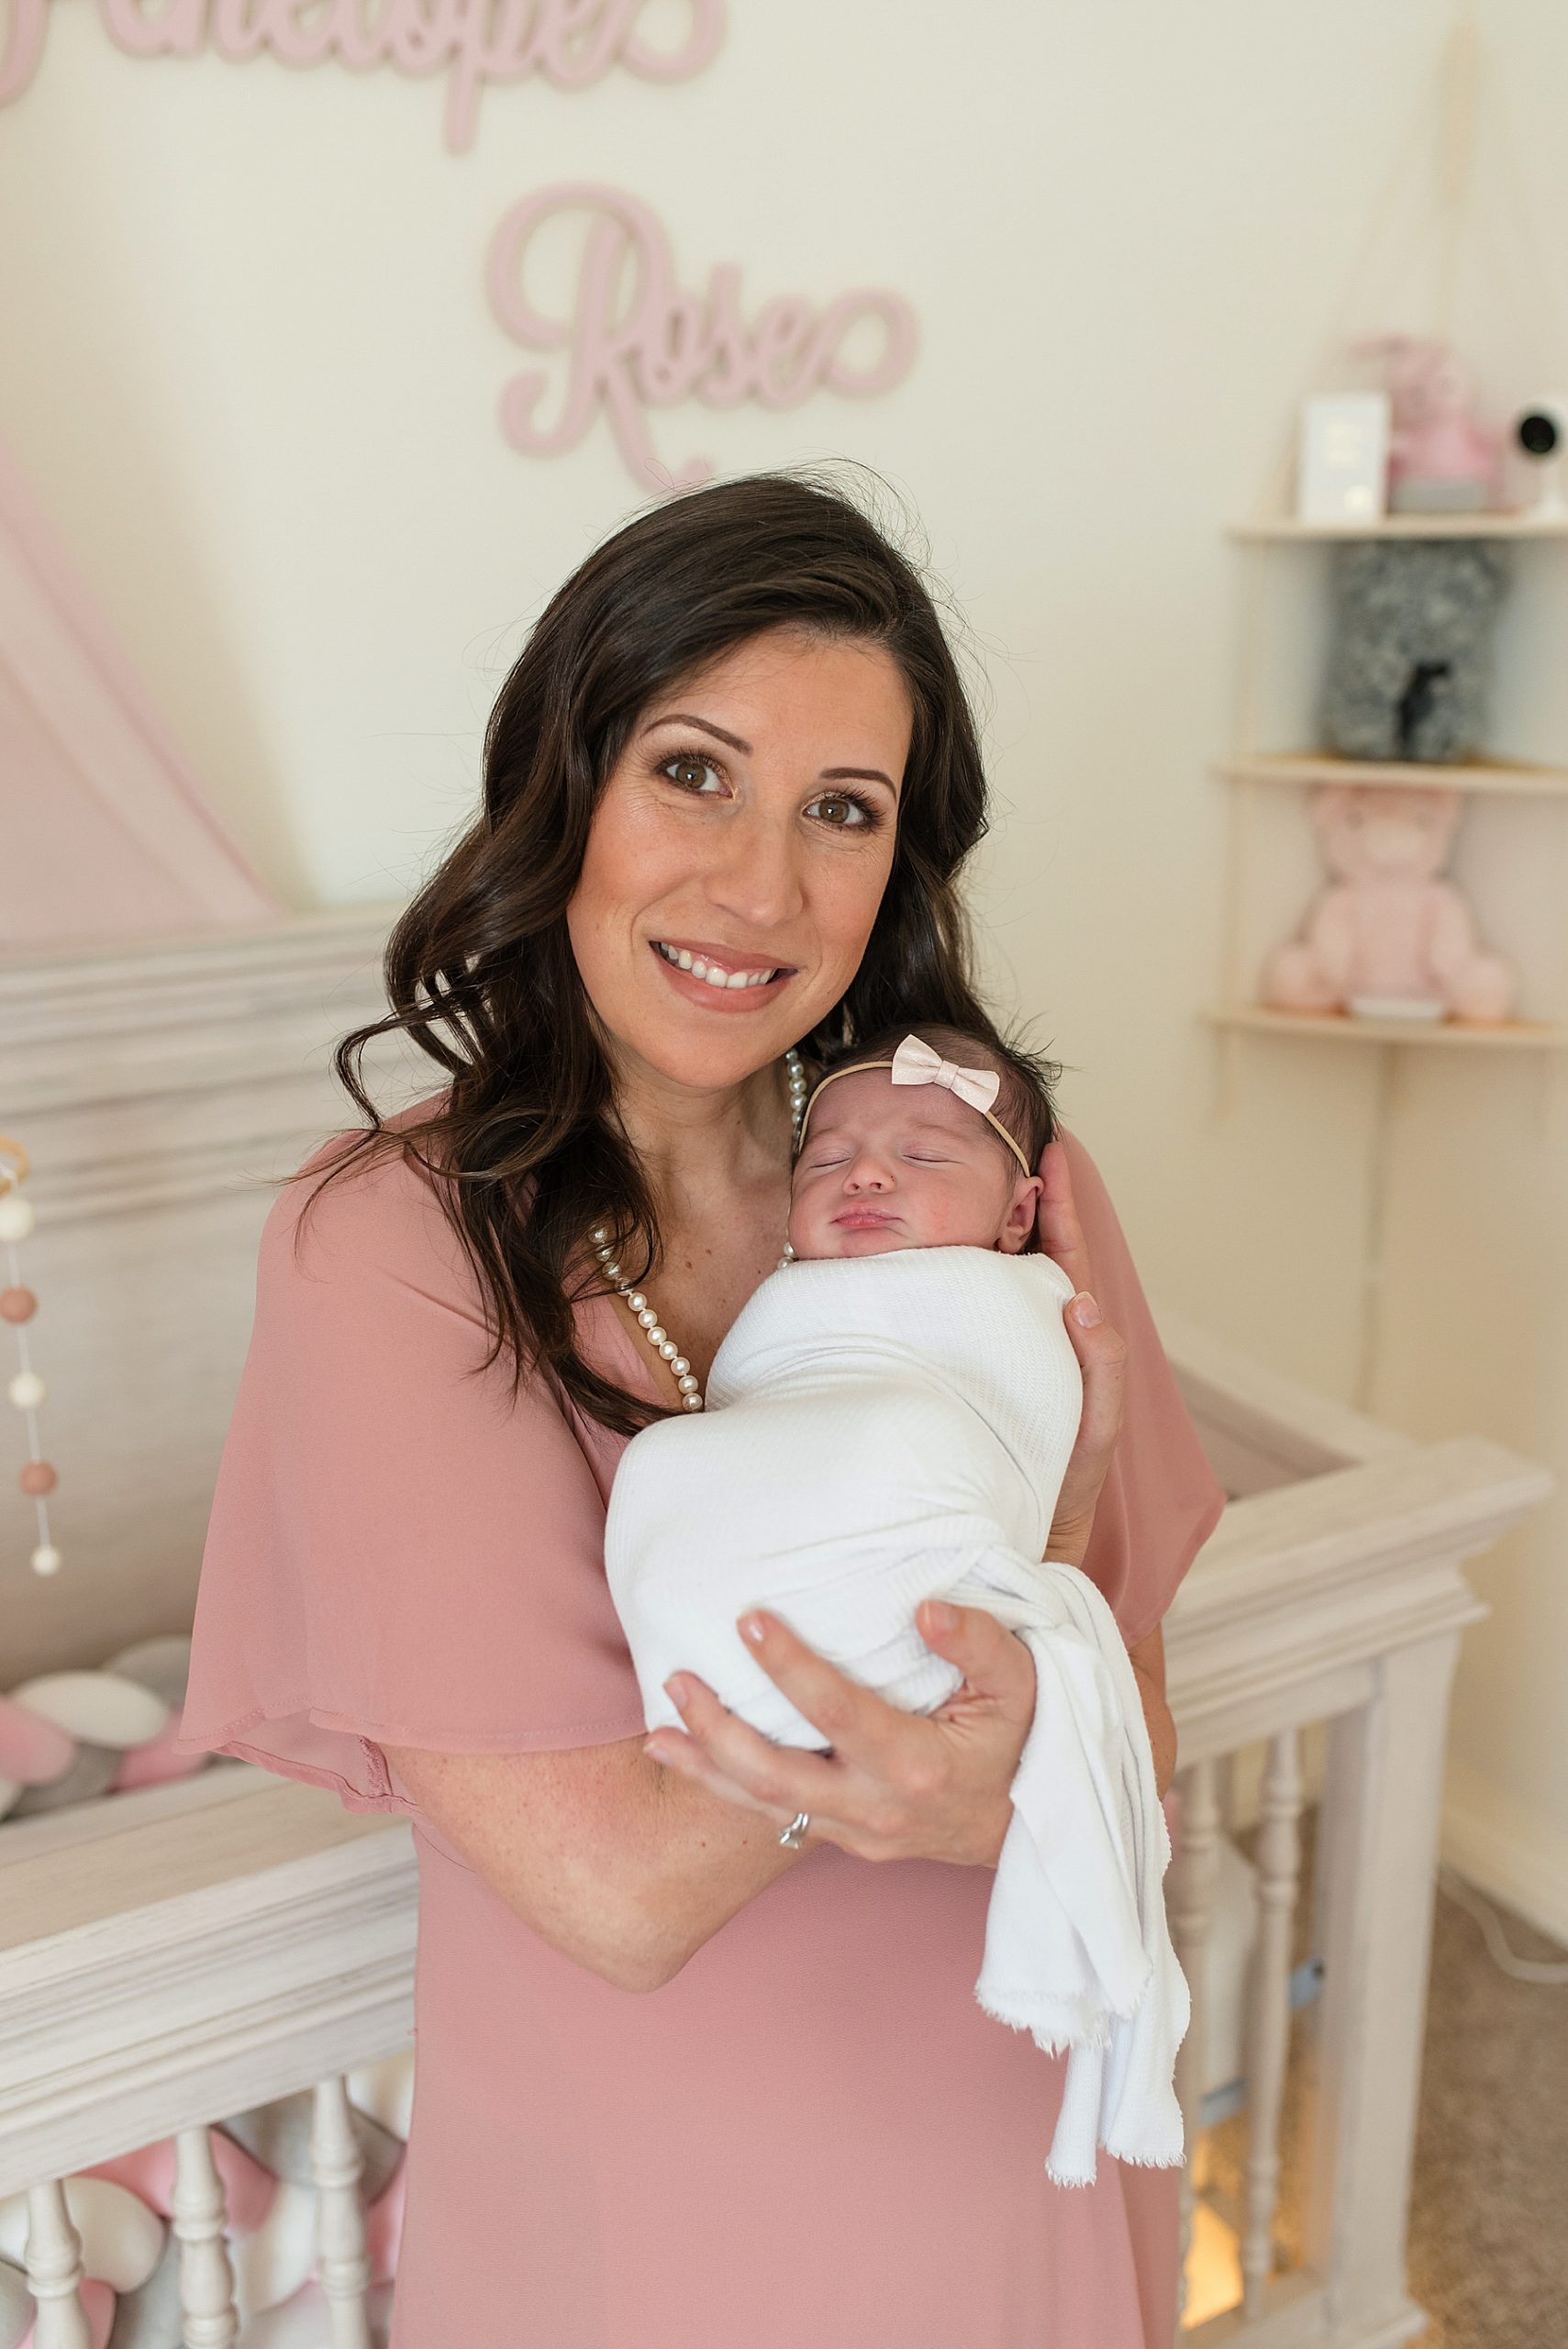 Mom holding newborn baby girl in pink and white nursery | In-Home Newborn Photo Session | Lindsey Dutton Photography | Dallas Area Family Photographer | newborn session, newborn posing ideas, newborn photos, girl nursery inspiration | via lindseyduttonphotography.com